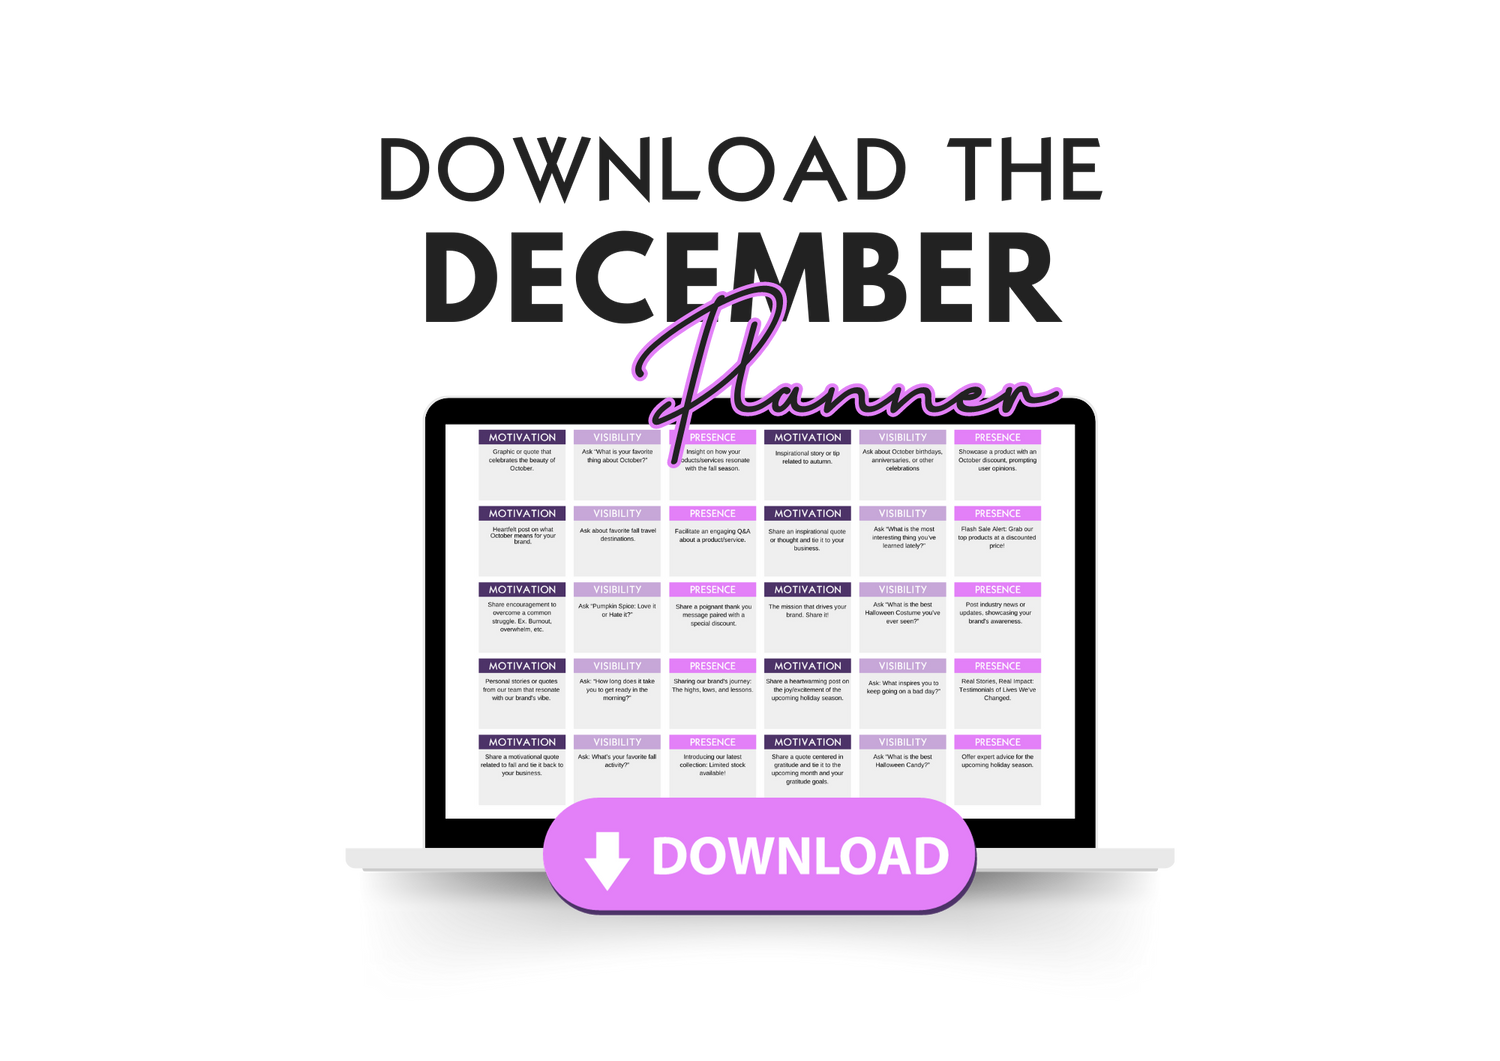 A link to download our free December social media content planner with 30 engaging post ideas for the month of december.